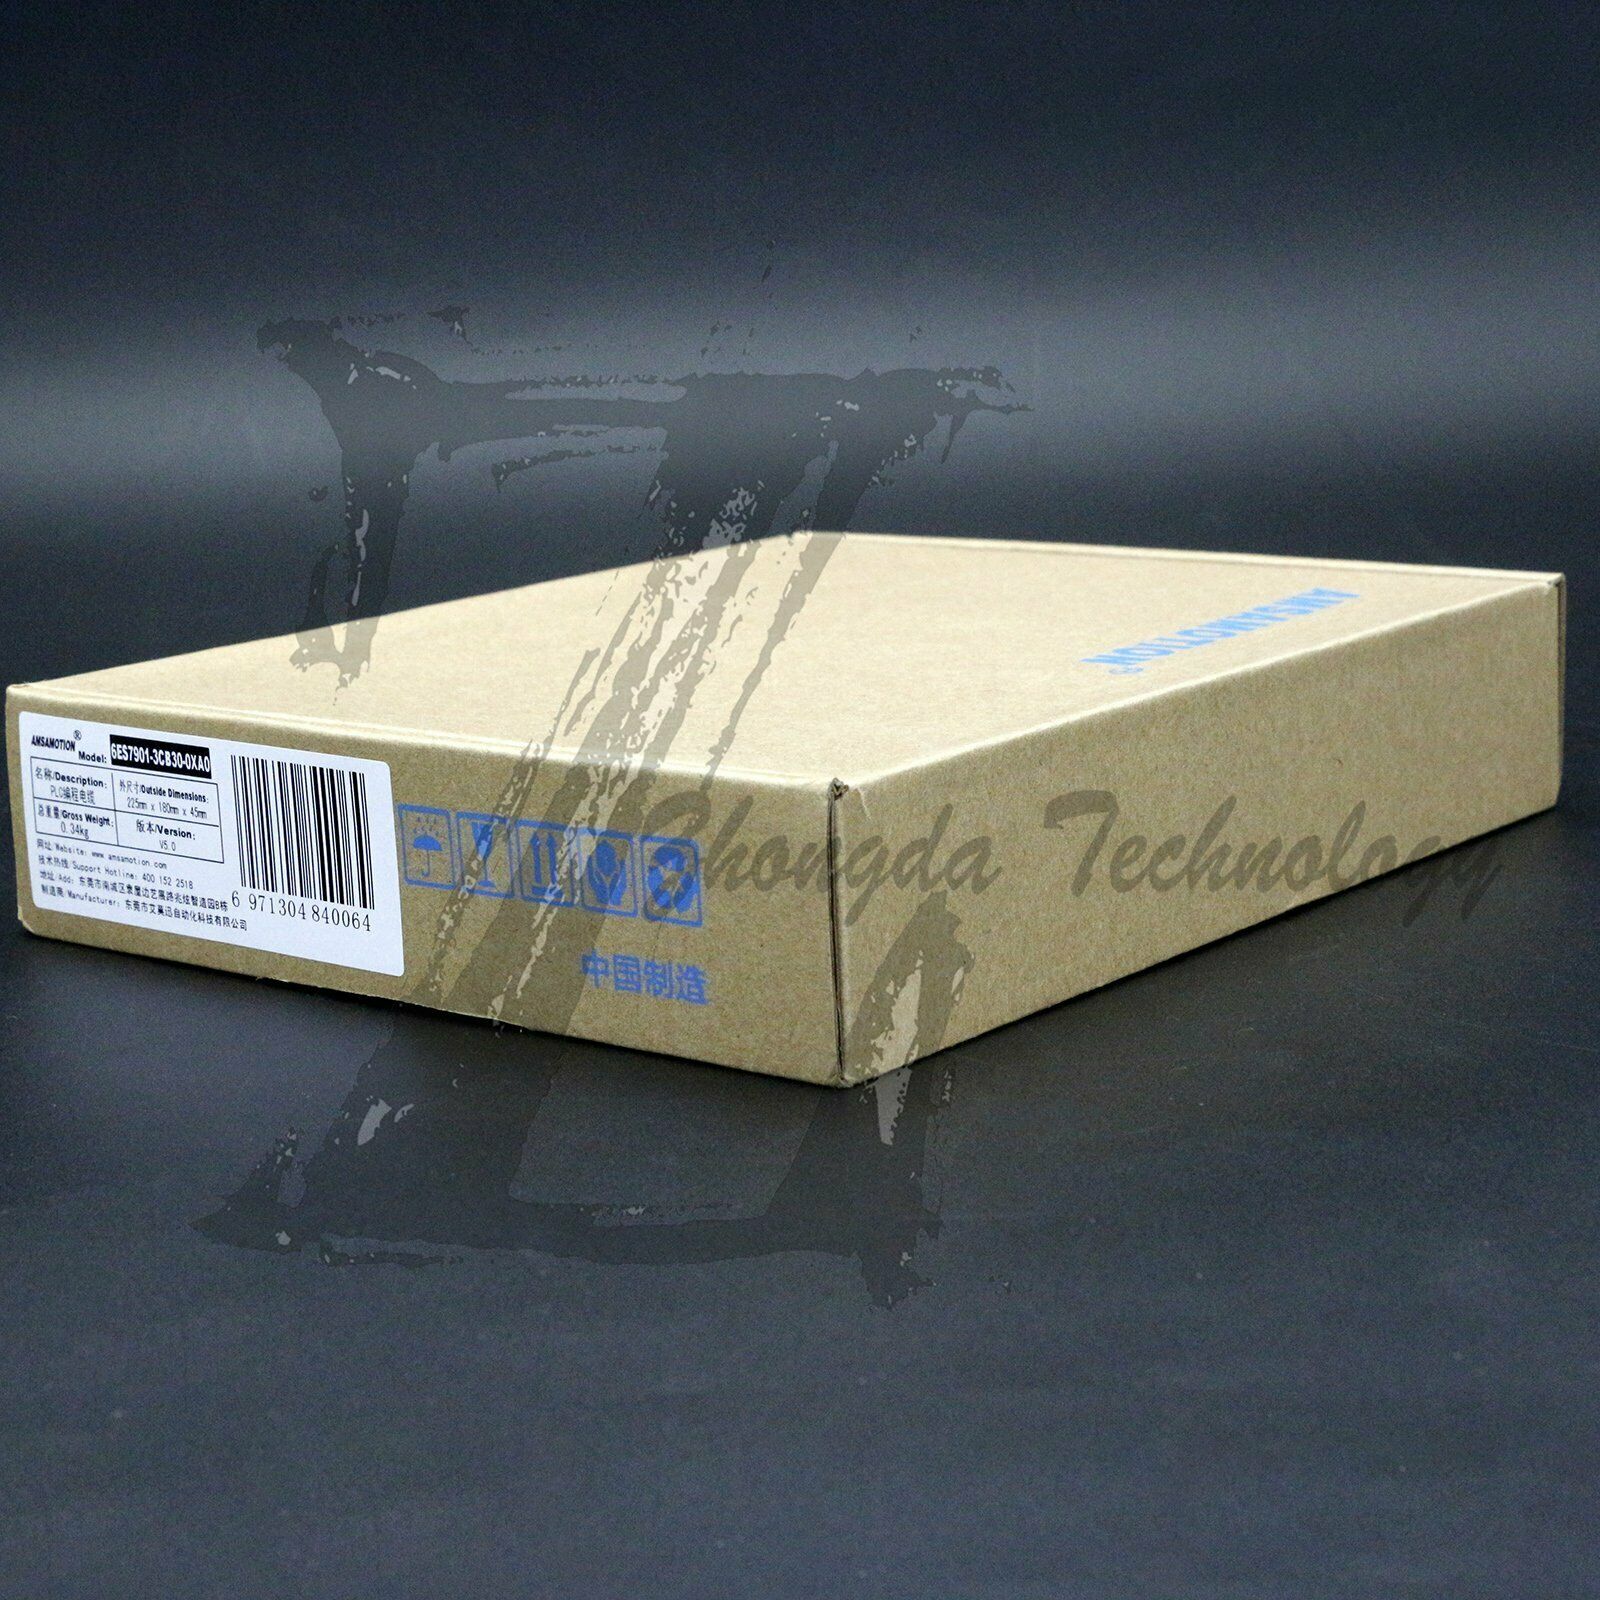 1PCS New Emerson Suitable for SIEMENS 6ES7 901-3CB30-0XA0 One year warranty KOEED 1, 90%, import_2020_10_10_031751, Other, Siemens